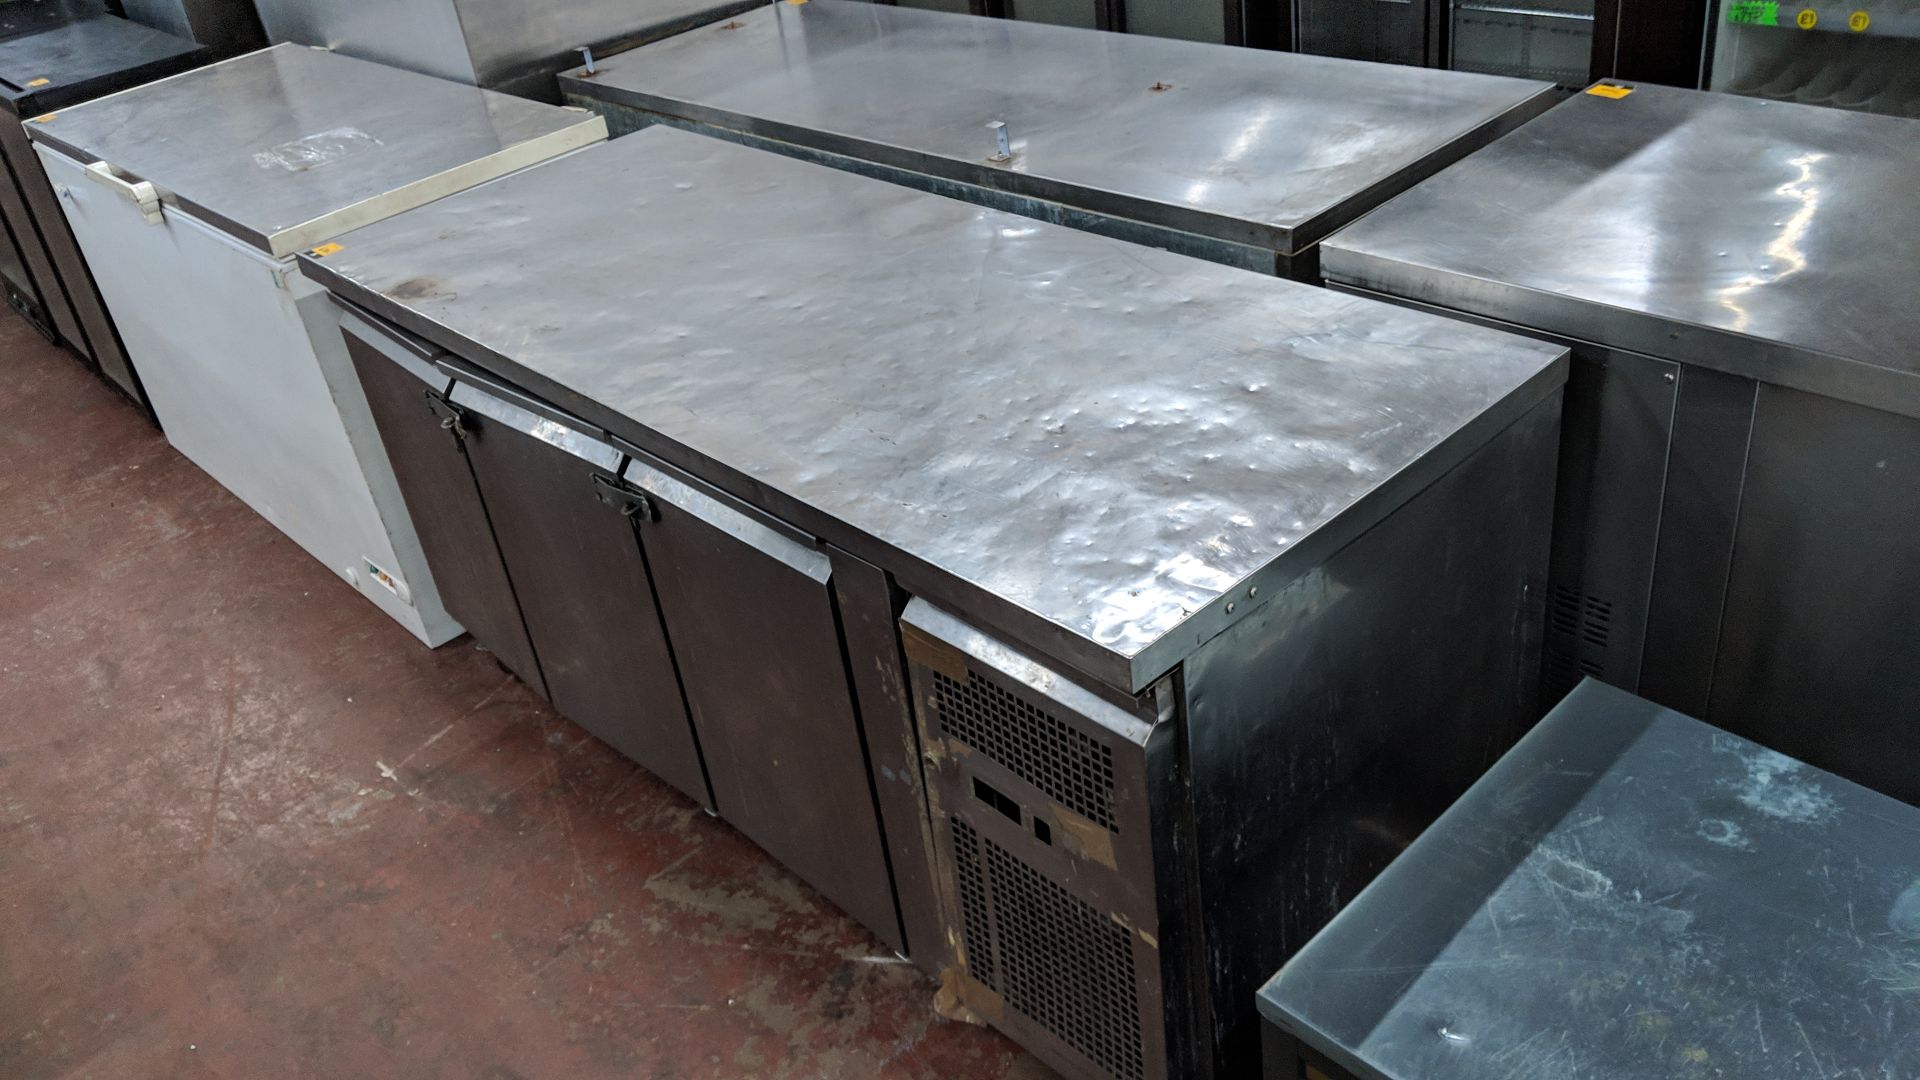 Stainless steel refrigerated prep cabinet IMPORTANT: Please remember goods successfully bid upon